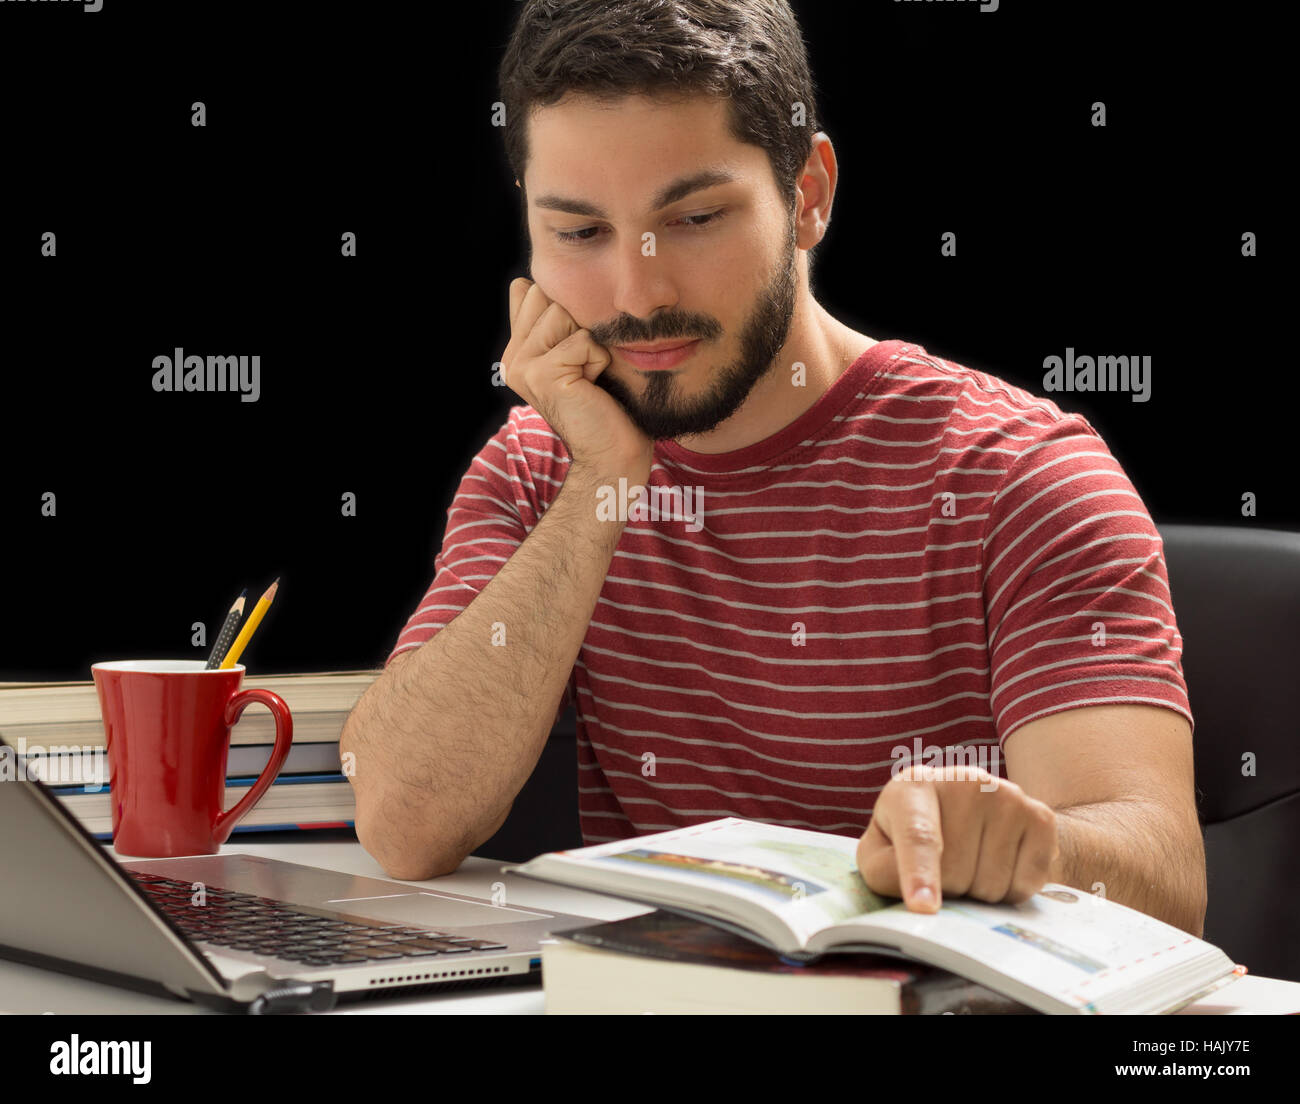 Male reading and pointing a book. Studies. Stock Photo